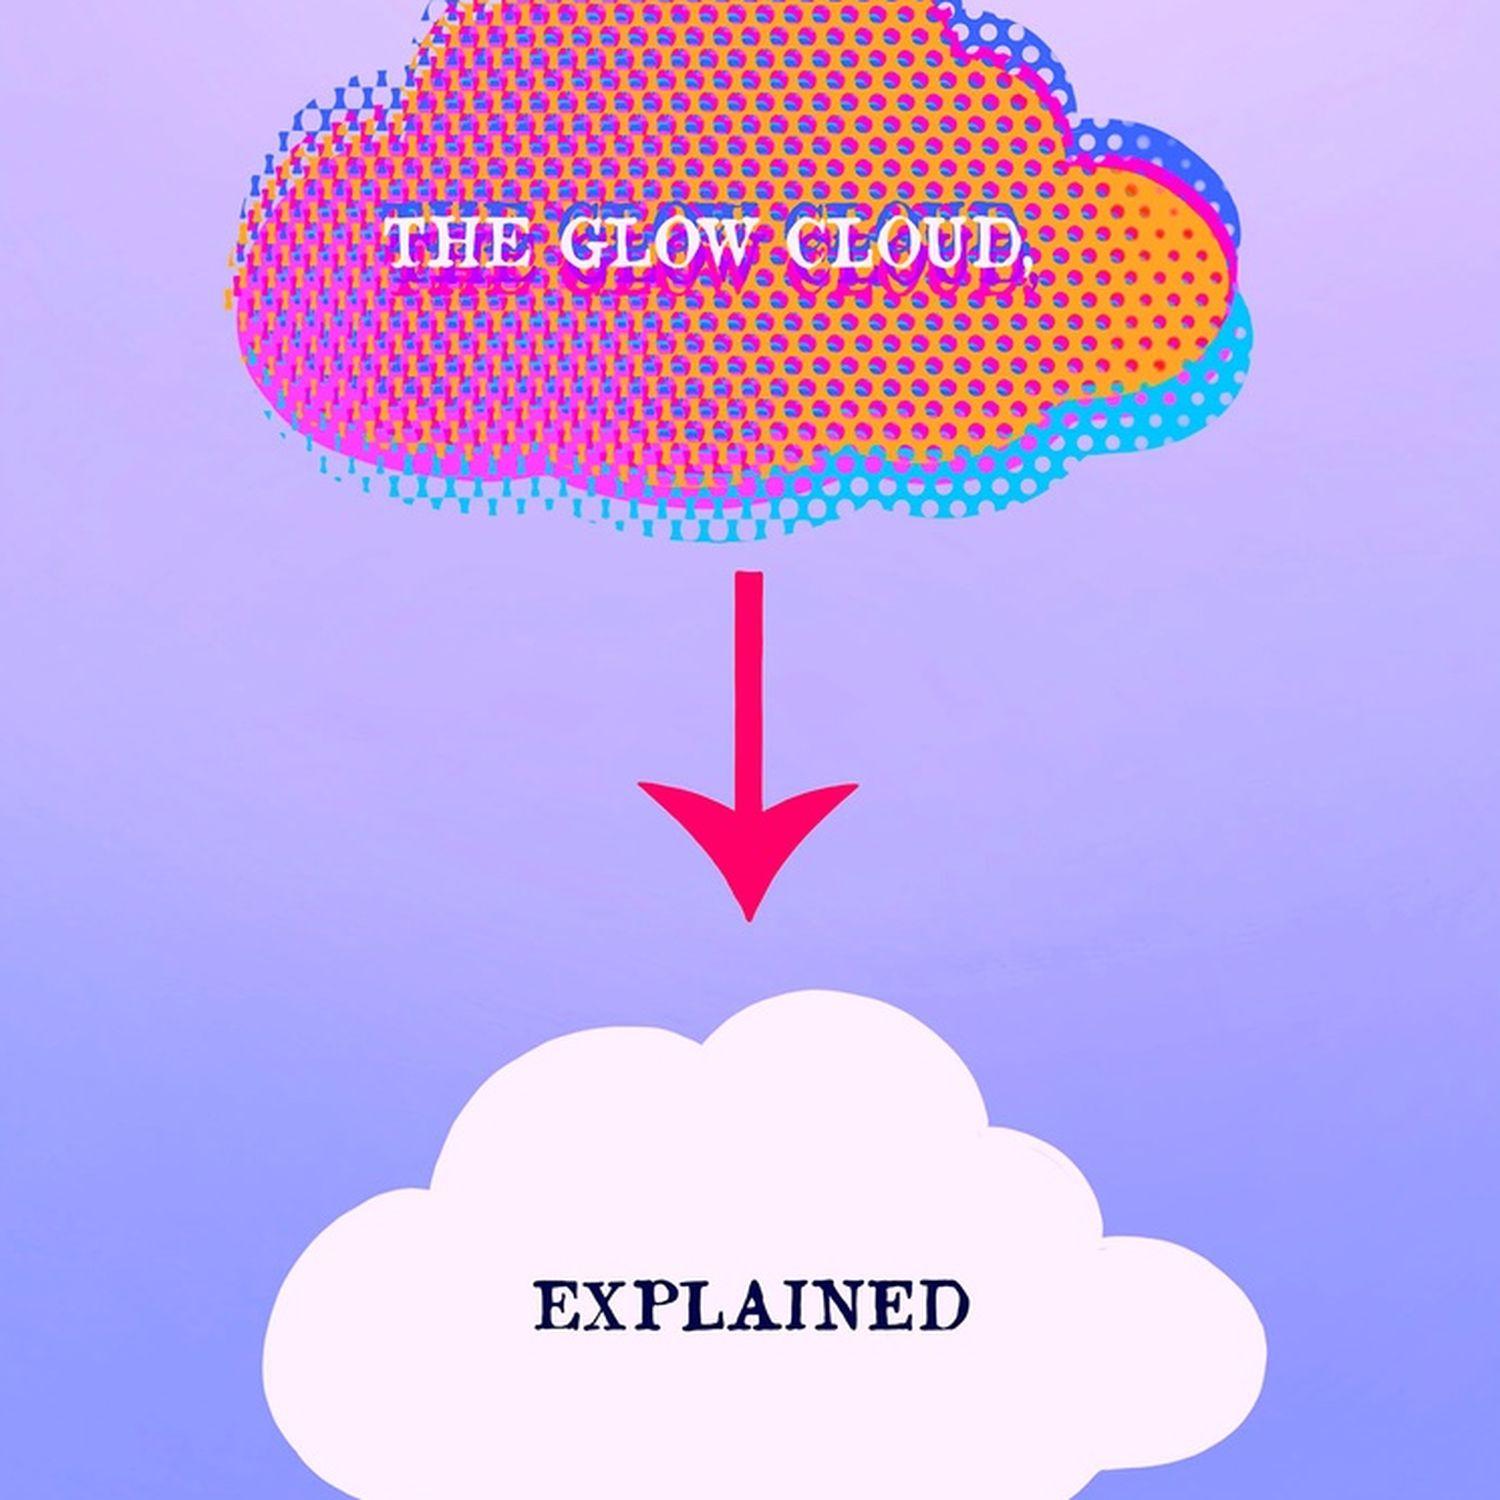 Thumbnail for "221 - The Glow Cloud, Explained".